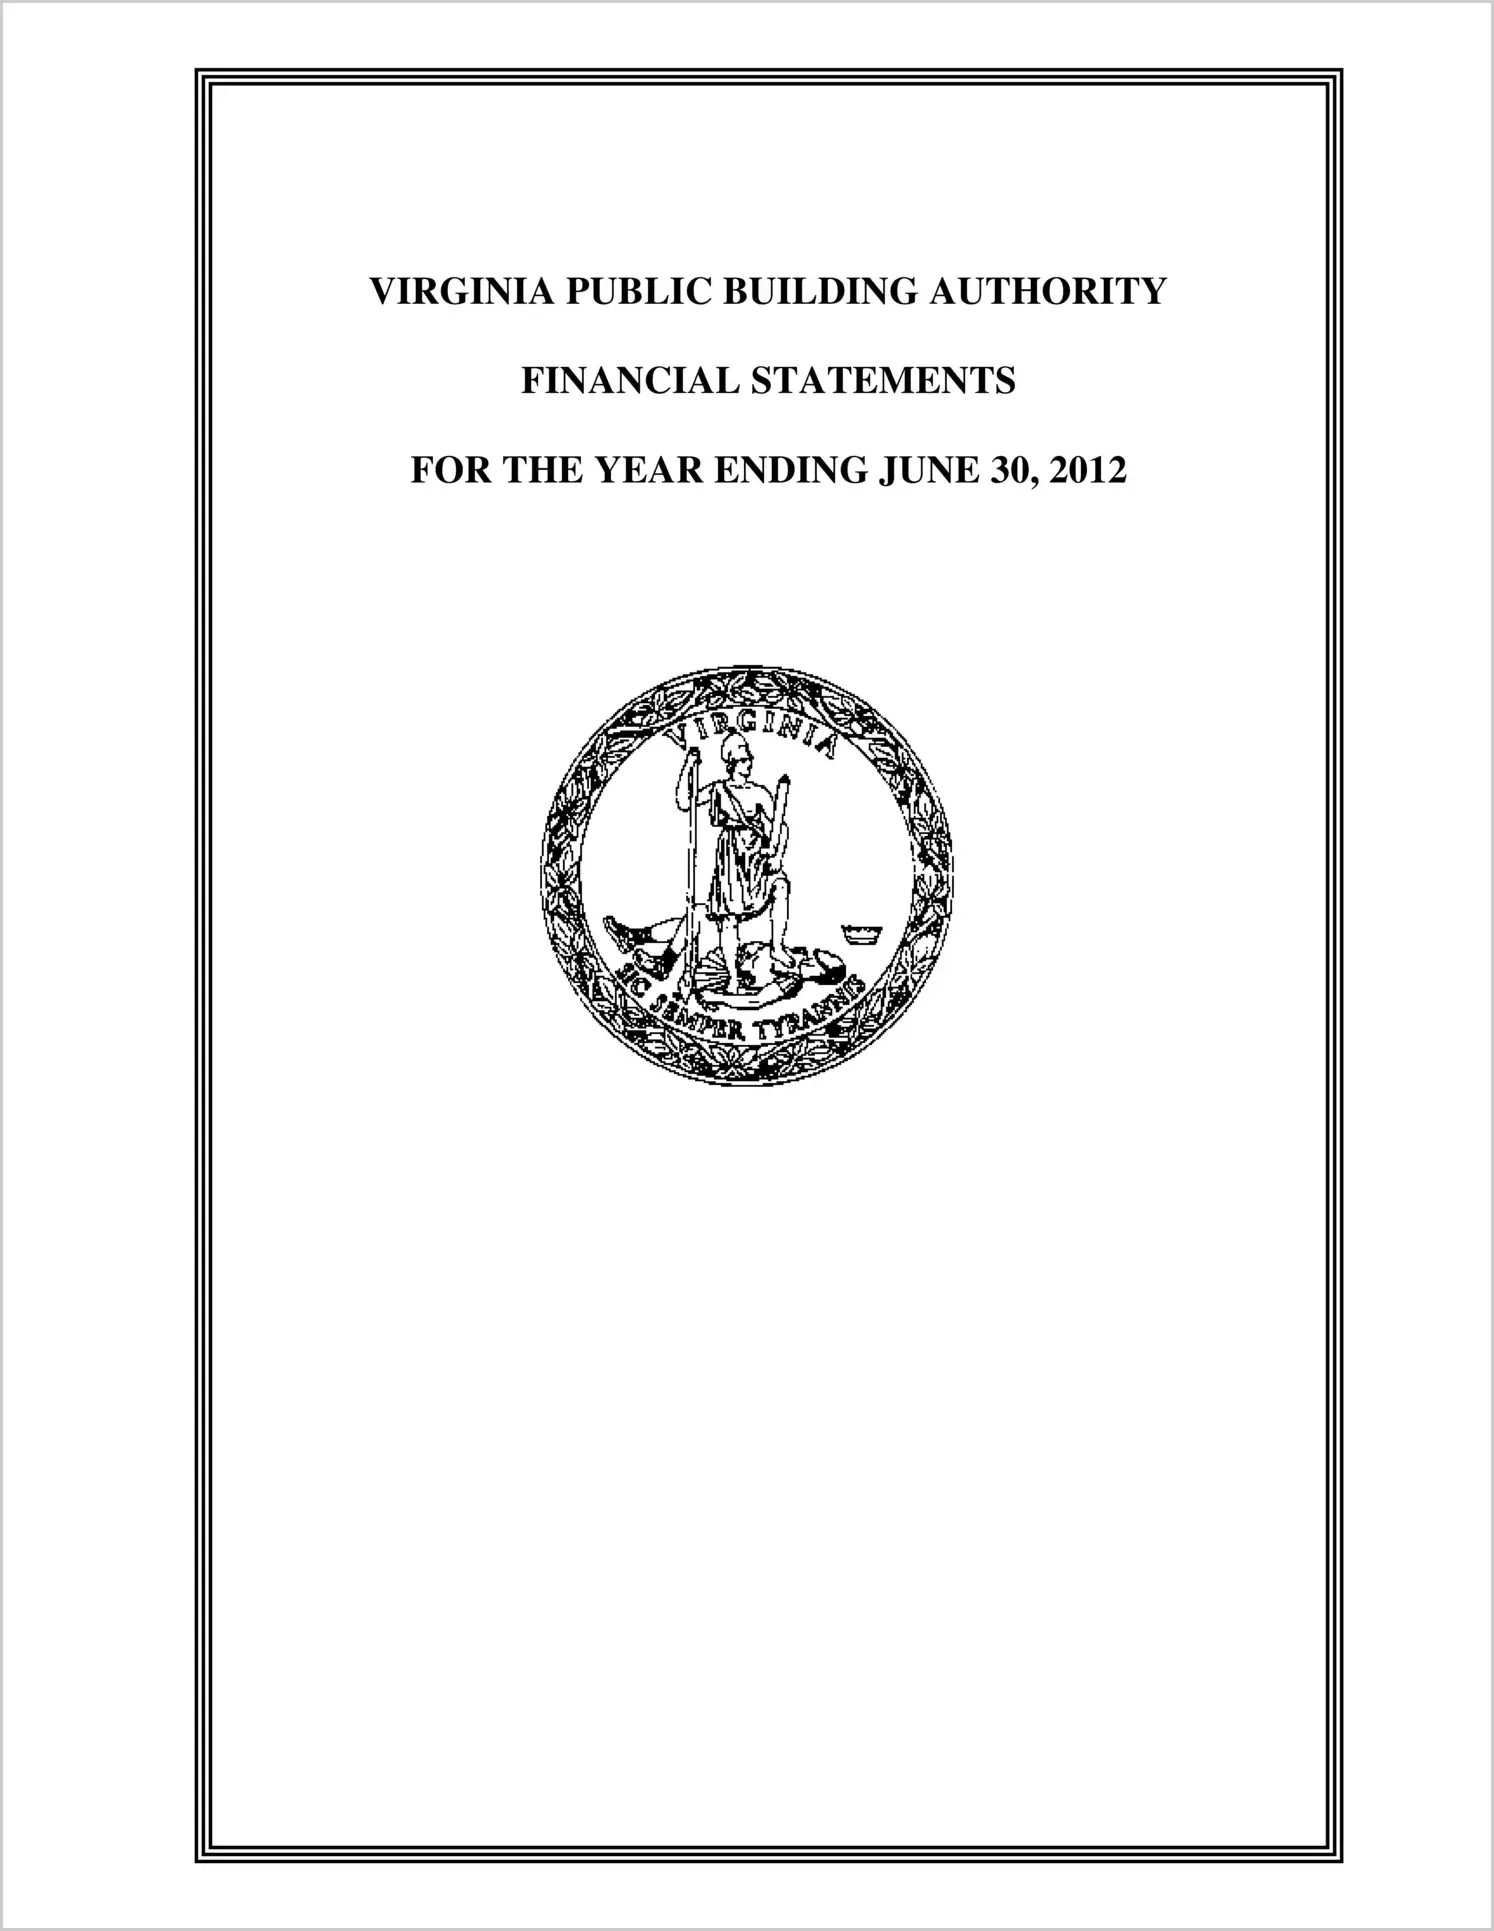 Virginia Public Building Authority Financial Statements for the year ended June 30, 2012